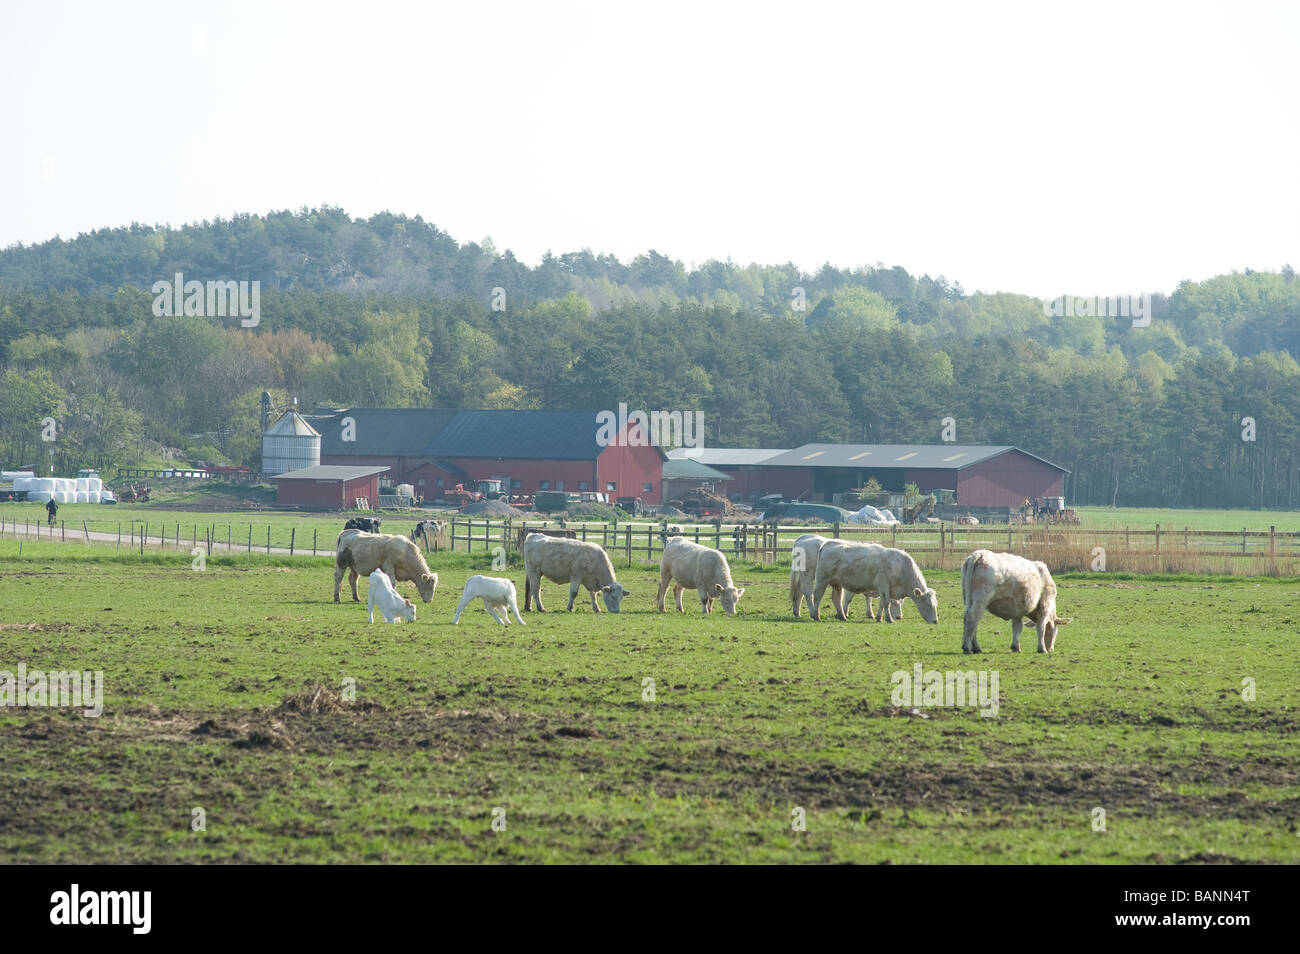 Herd of white cows, Sweden Stock Photo